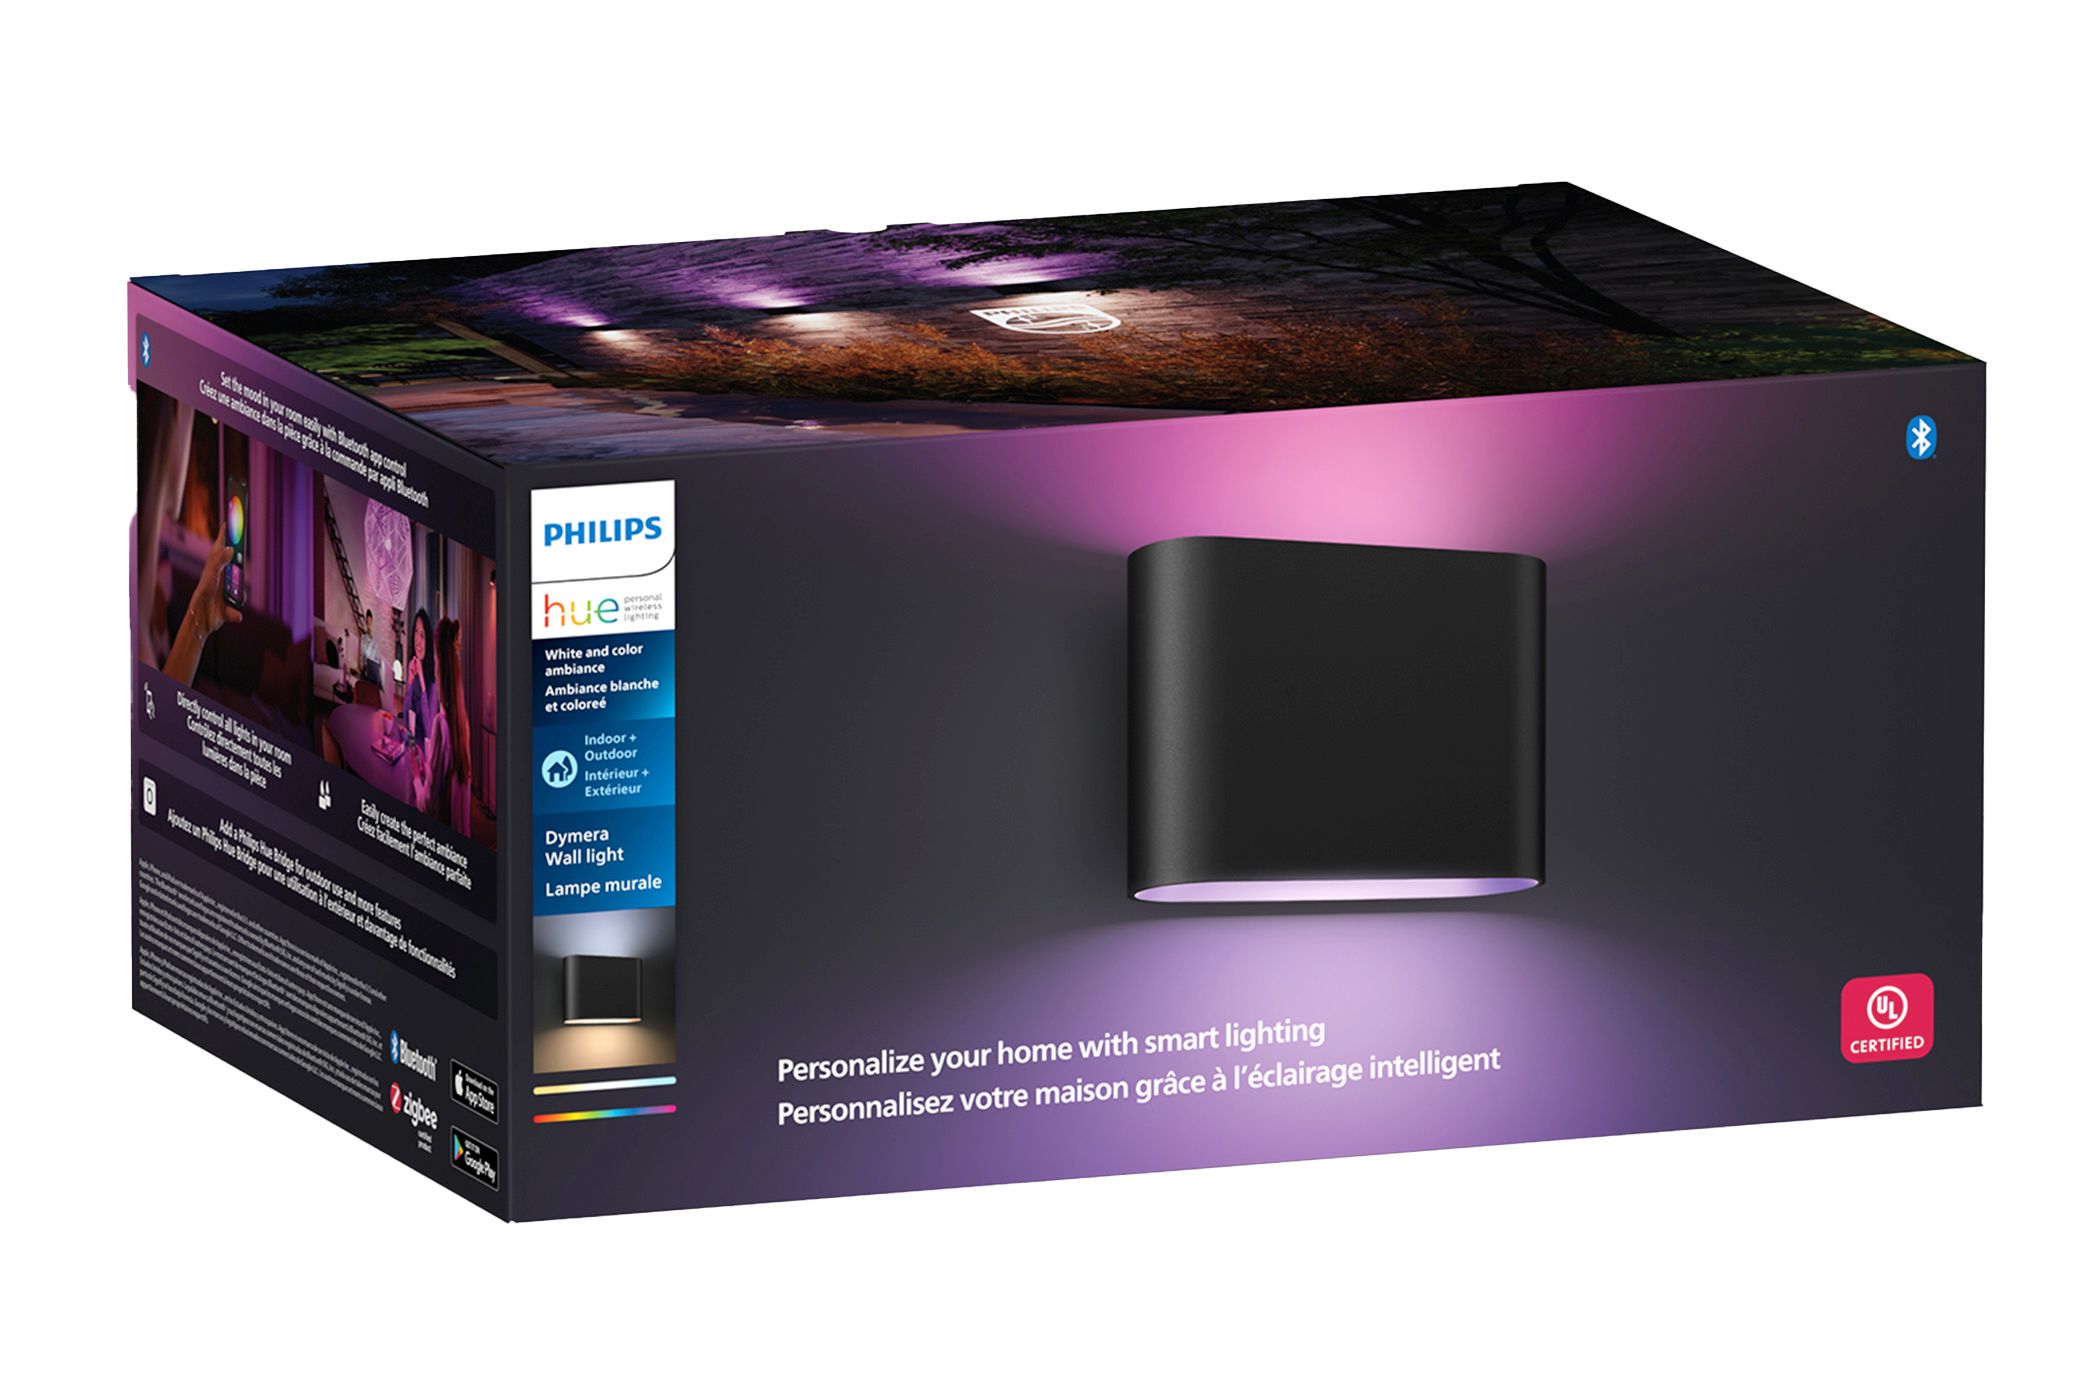 Packaging for the Philips Hue Dymera wall light.